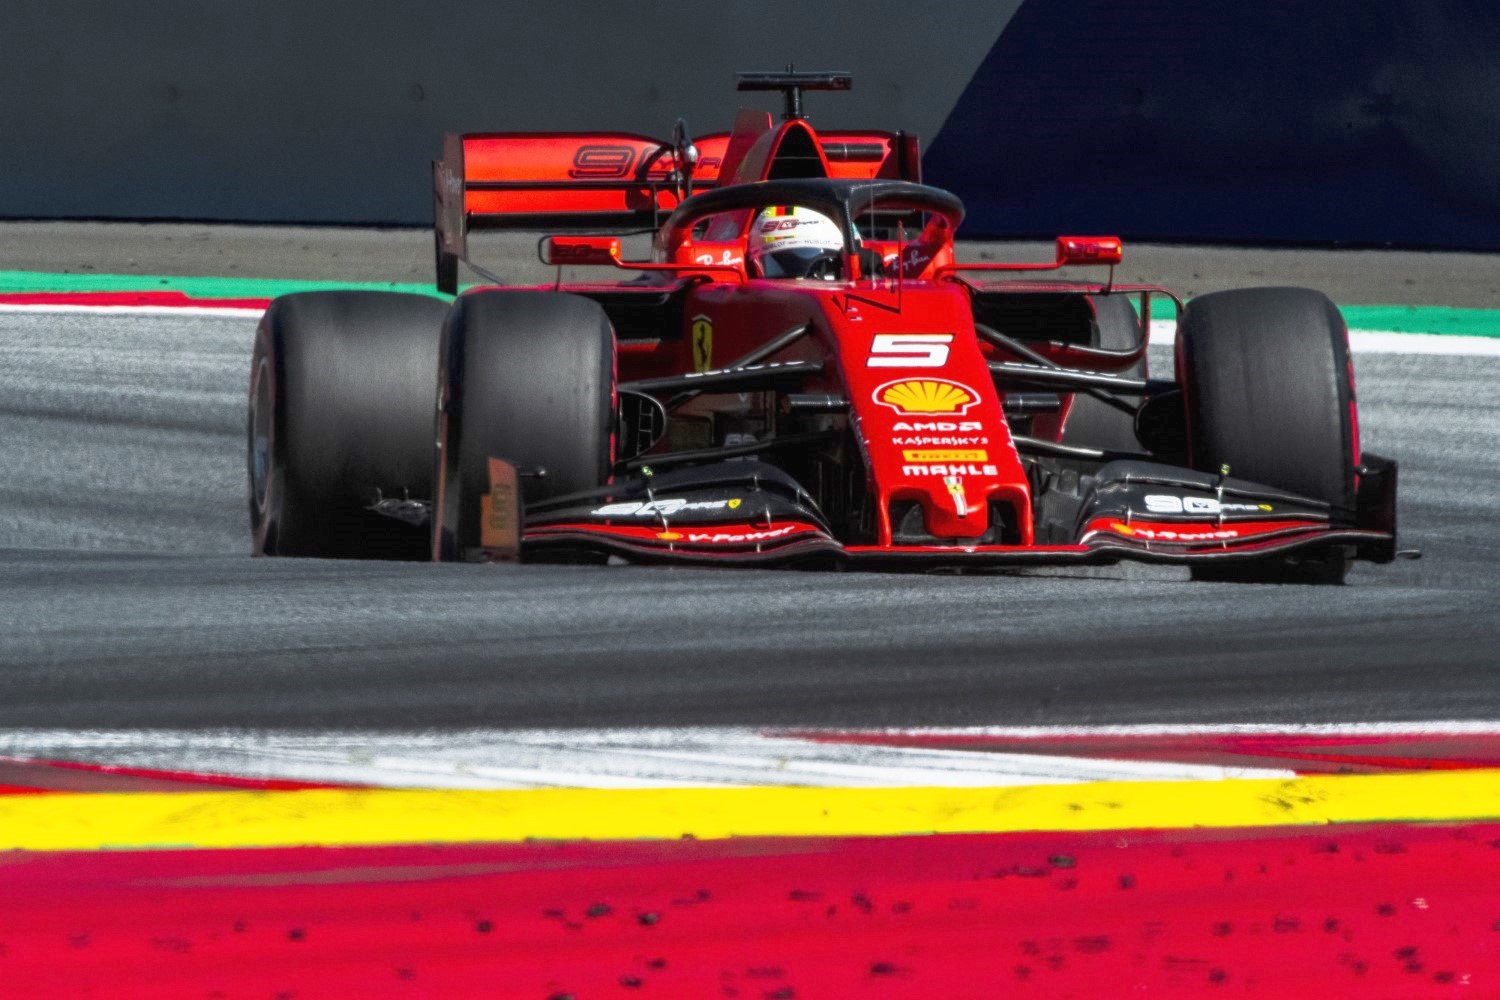 Vettel is making too many mistakes trying to beat the superior Aldo Costa designed Mercedes